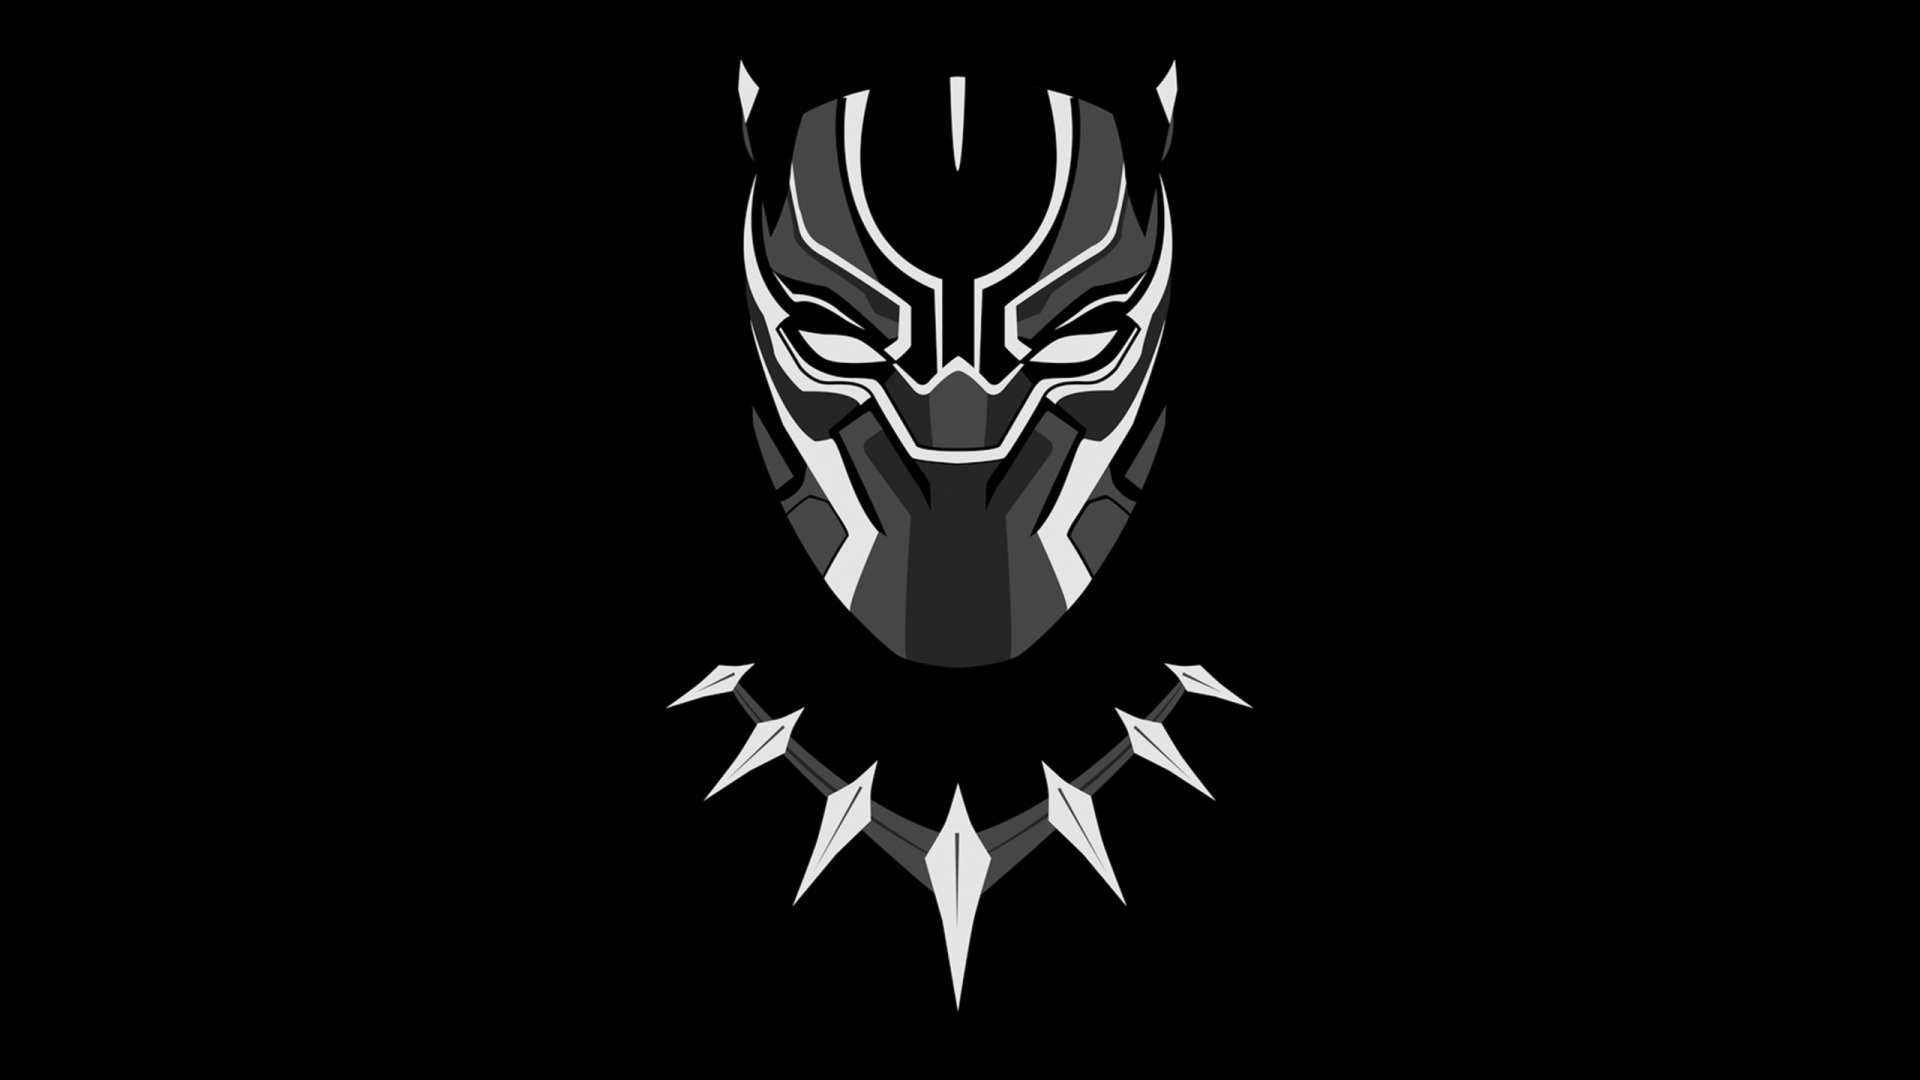 1920x1080 Black Panther Minimal Artwork 1080p Laptop Full Hd Wallpaper Hd Movies 4k Wallpapers Images Photos And Background